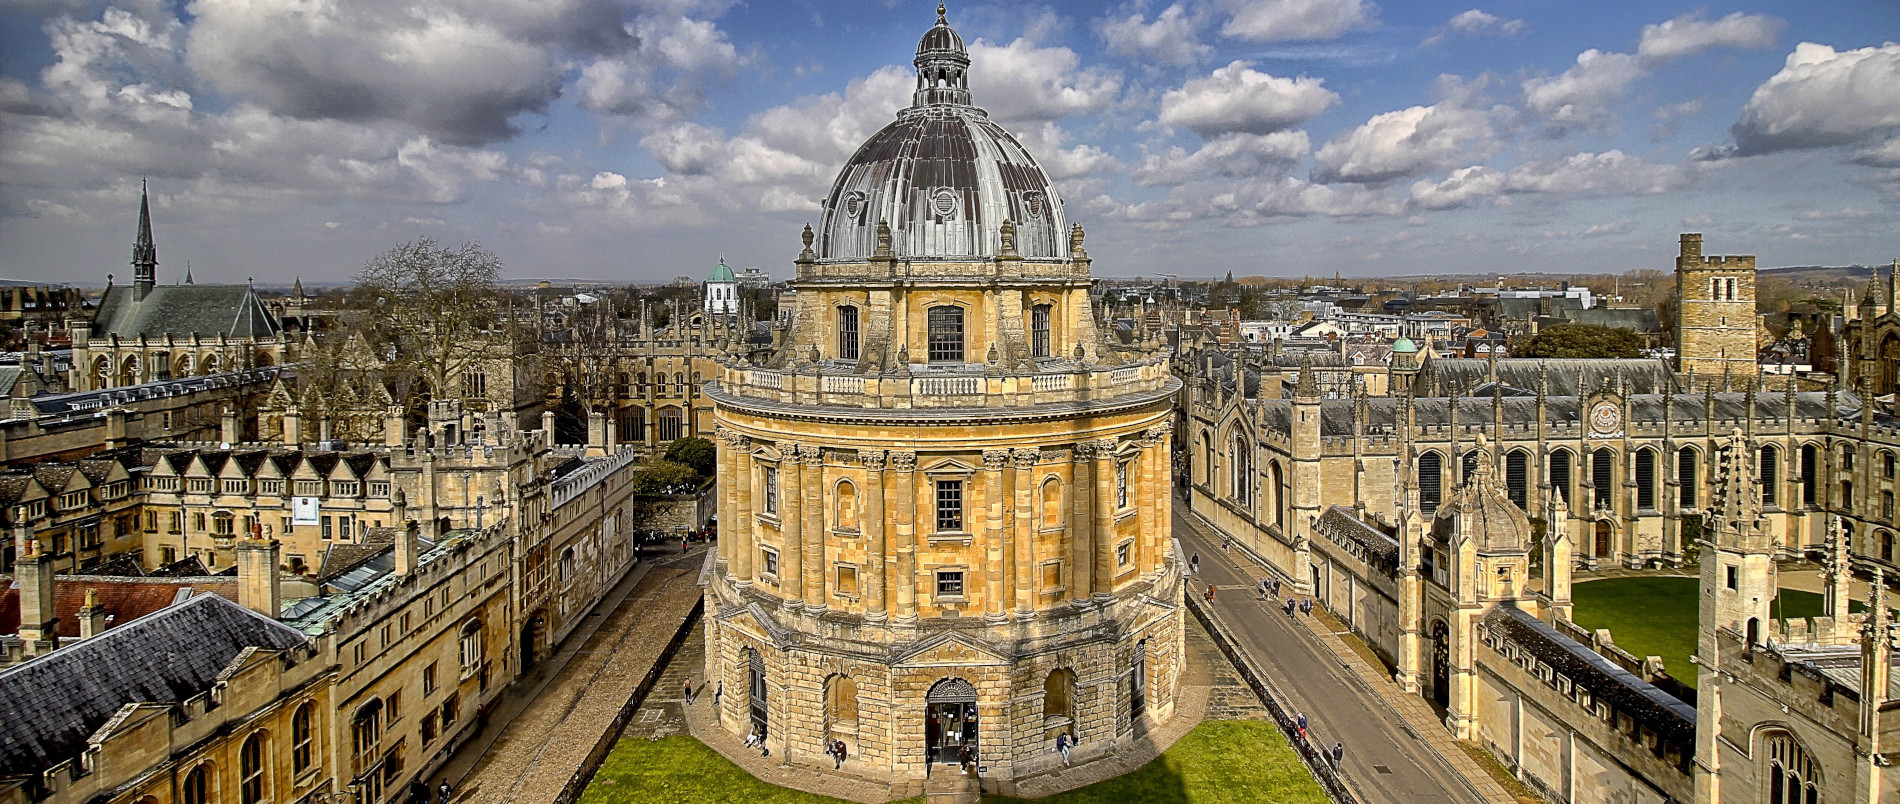 Image of the Radcliffe Camera, Oxford